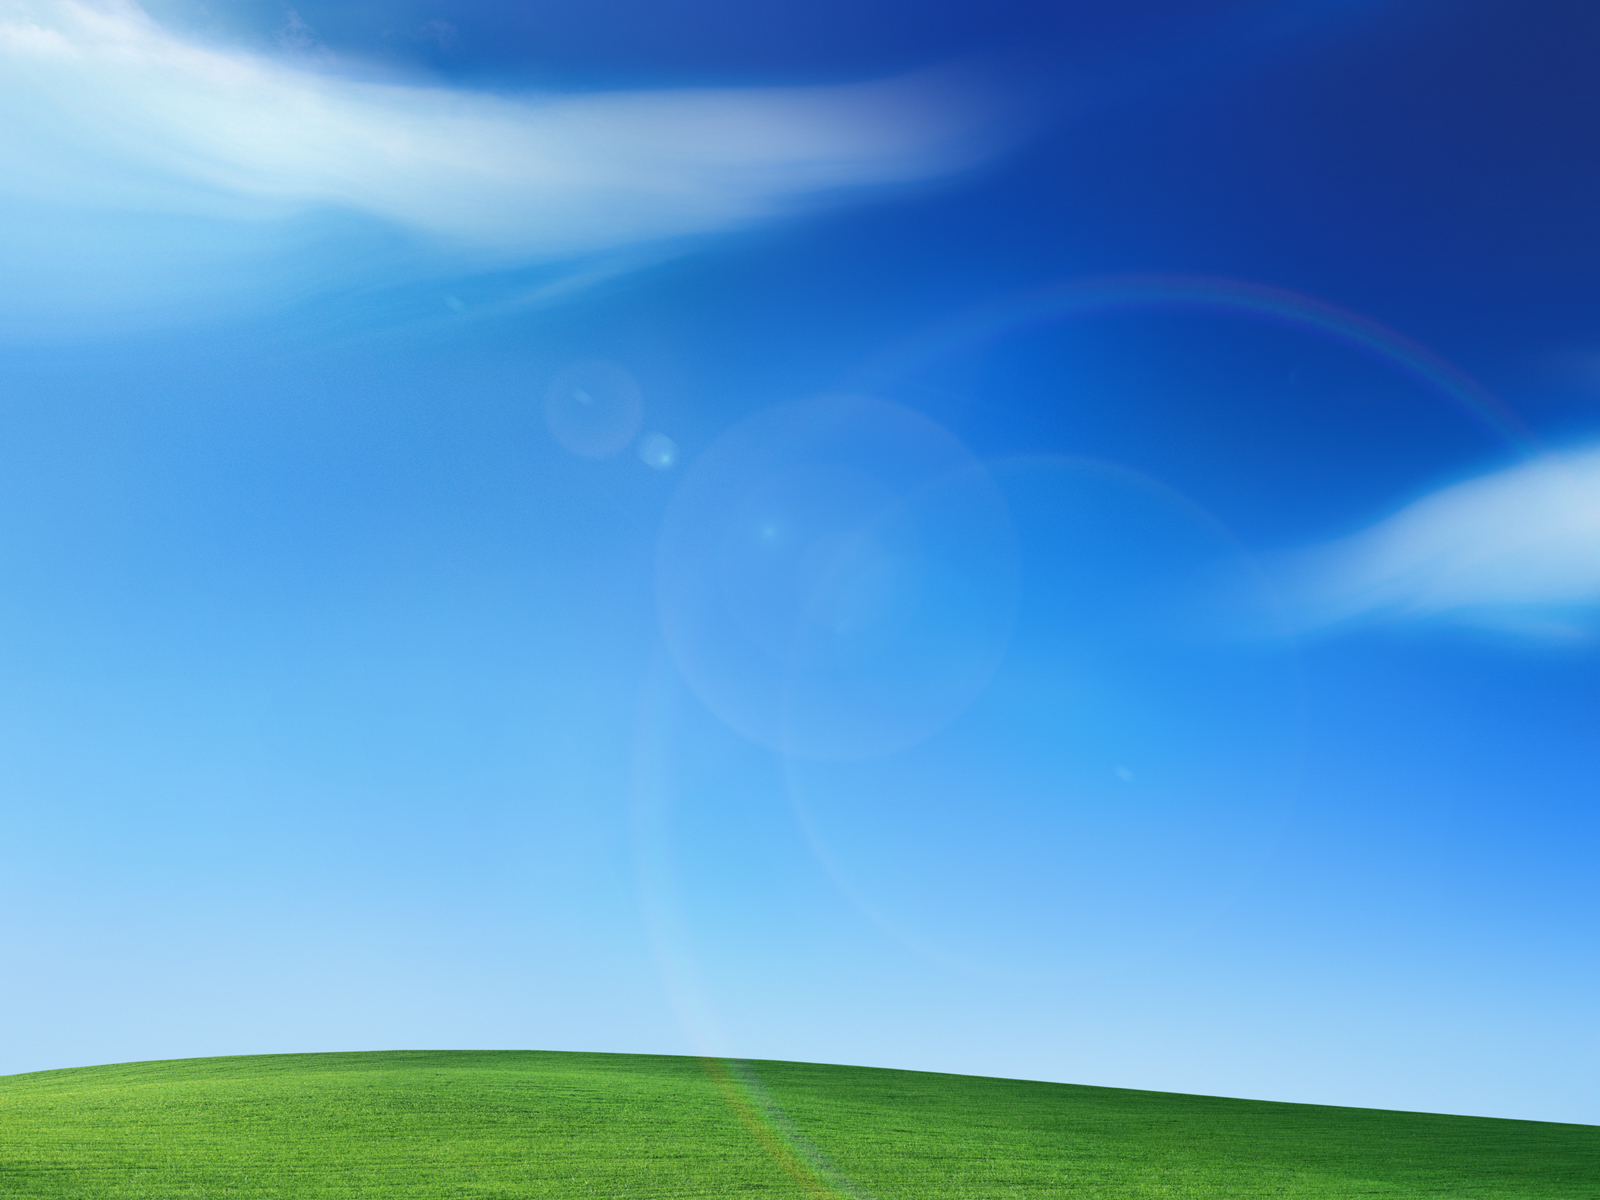 Windows Xp Wallpapers Cool